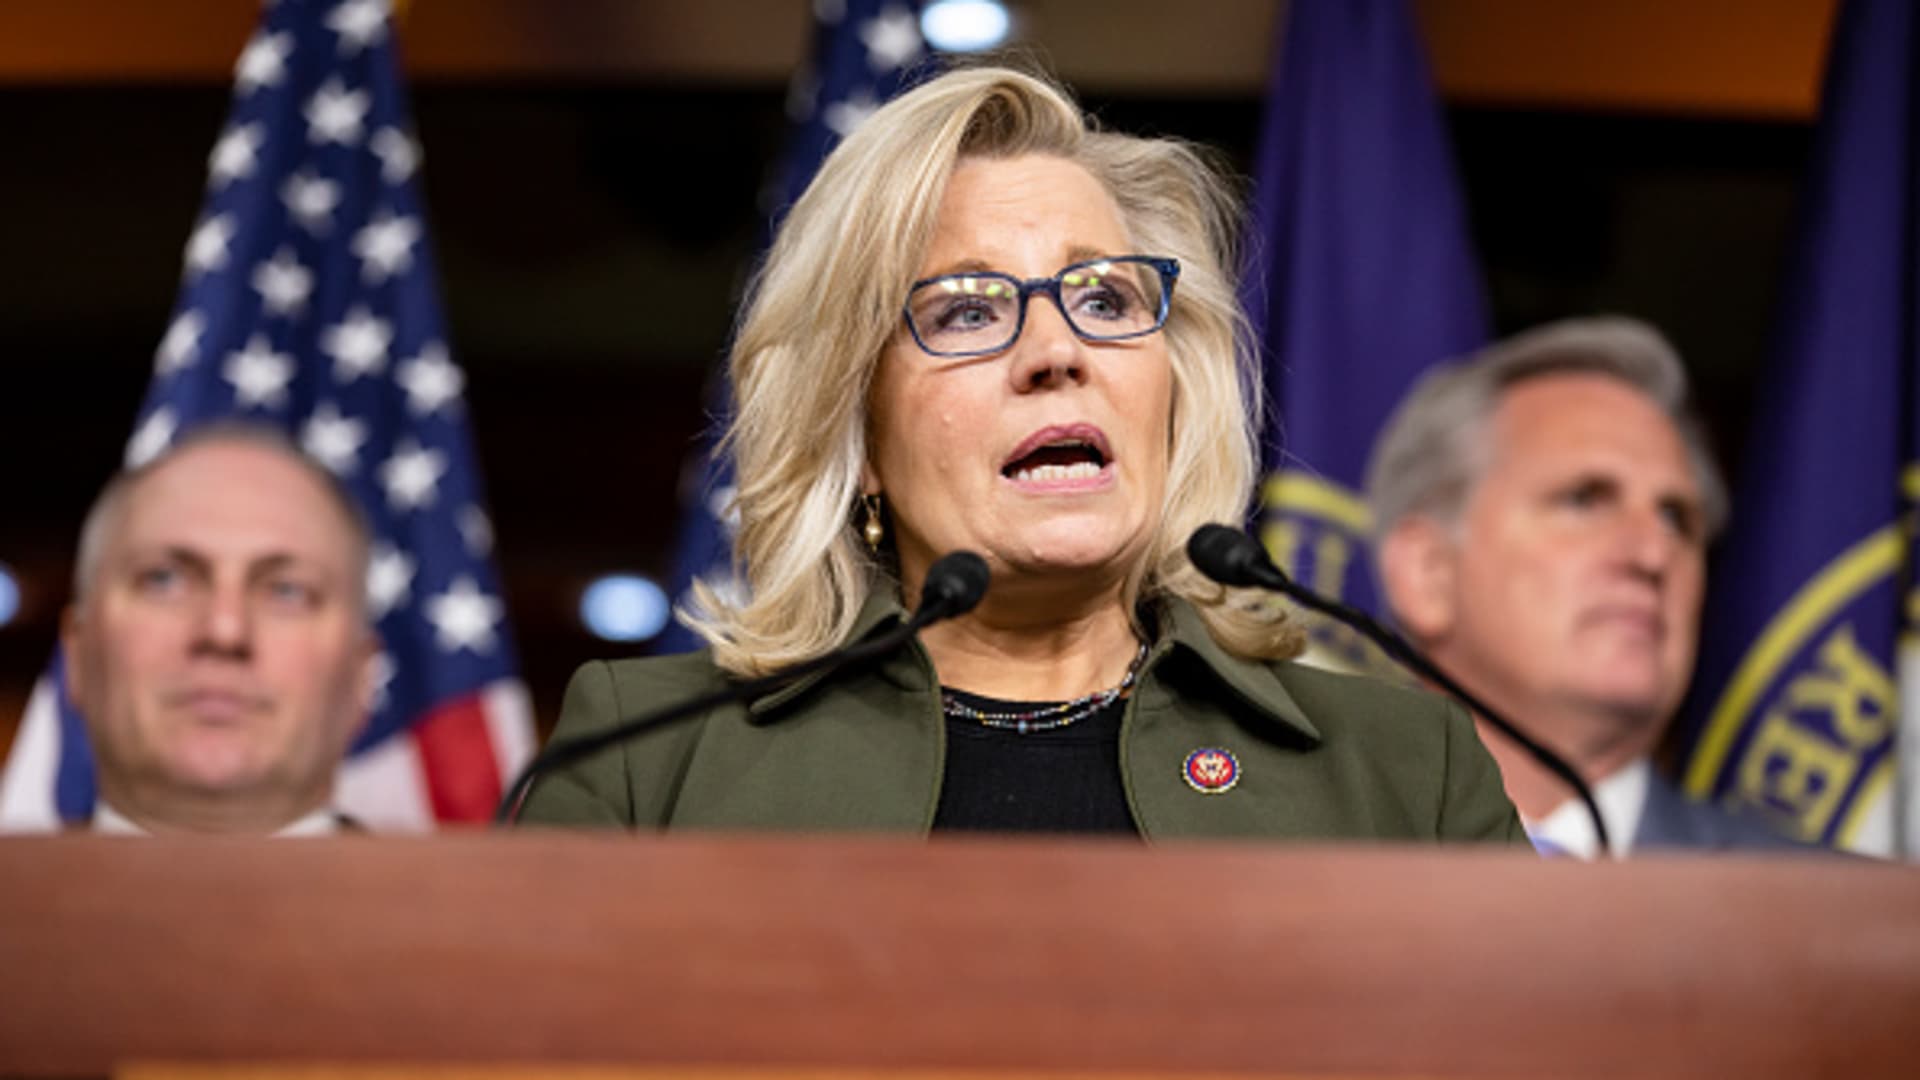 Republican Conference Chairman Rep. Liz Cheney (R-WY) speaks during a press conference with House Minority Leader Rep. Kevin McCarthy (R-CA) (R) and Republican Whip Rep. Steve Scalise (R-LA) at the US Capitol on December 17, 2019 in Washington, DC.